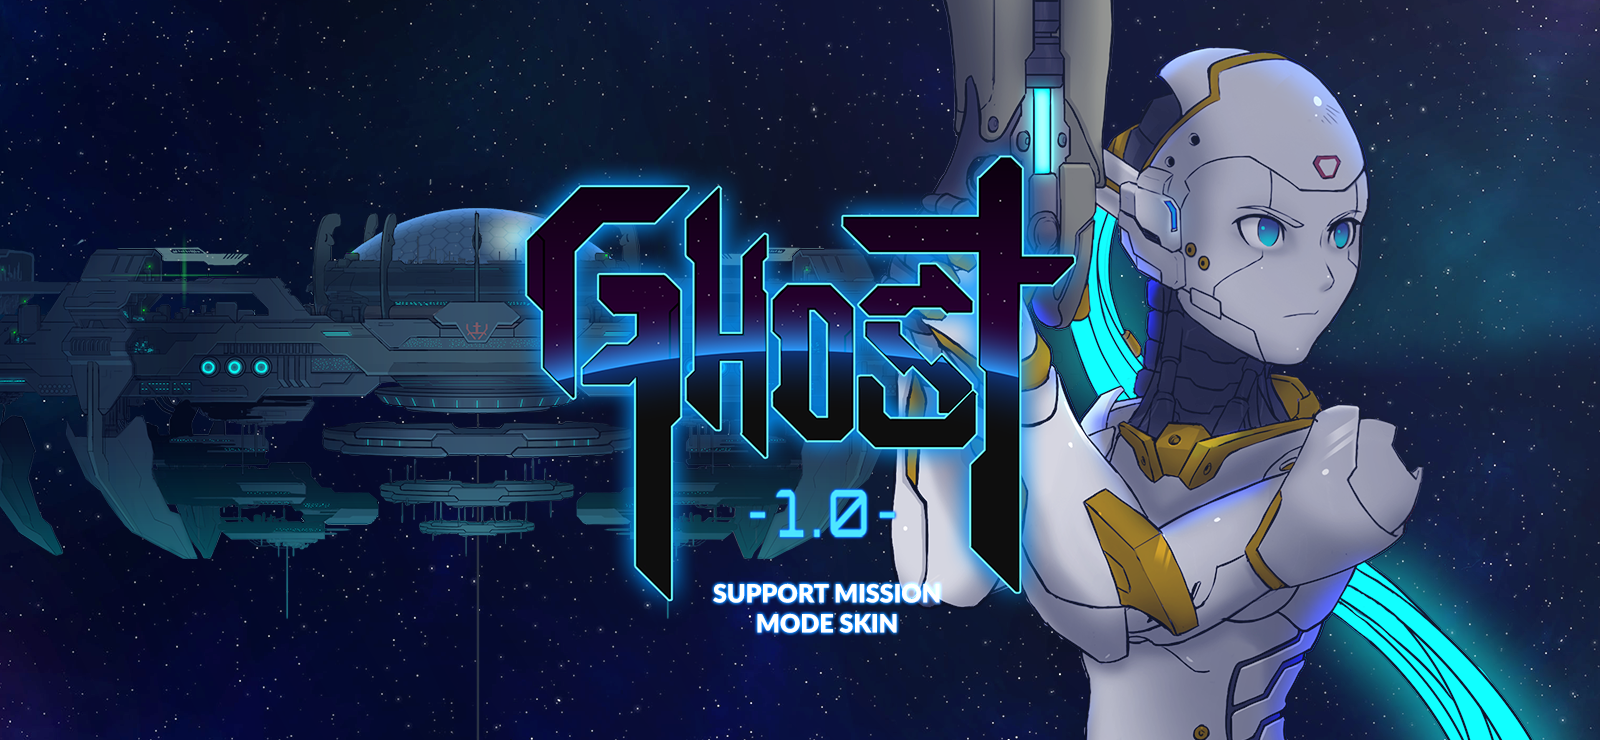 Ghost 1.0 - Support Mission Mode Skin